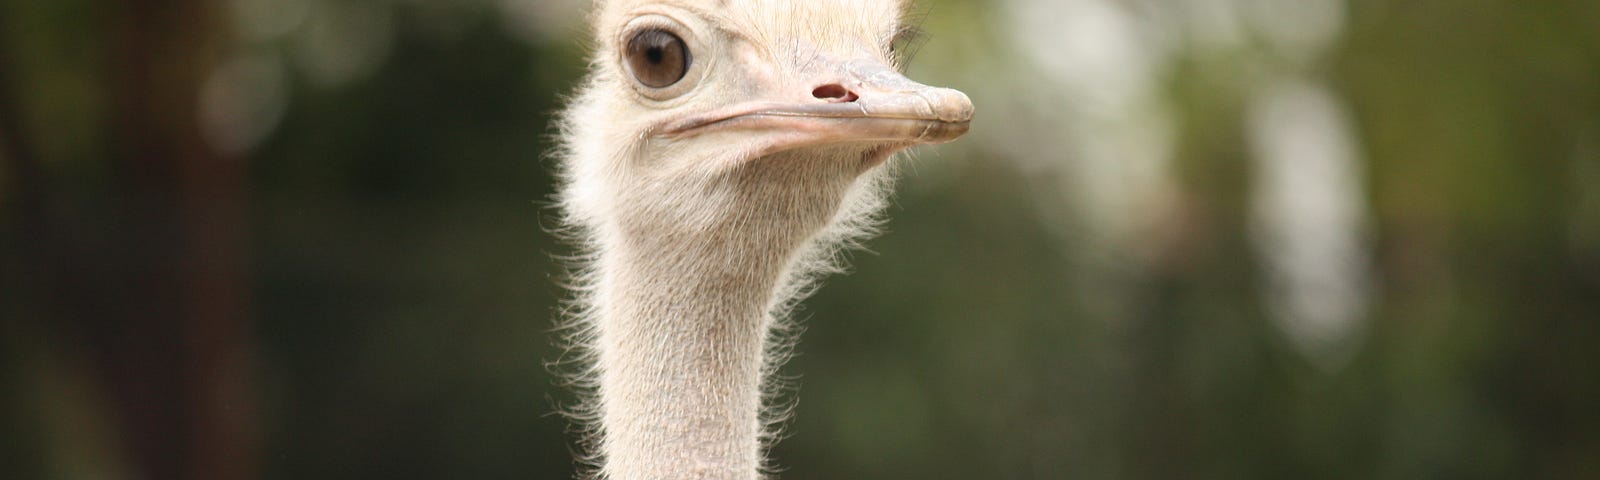 Ostrich’s head and neck